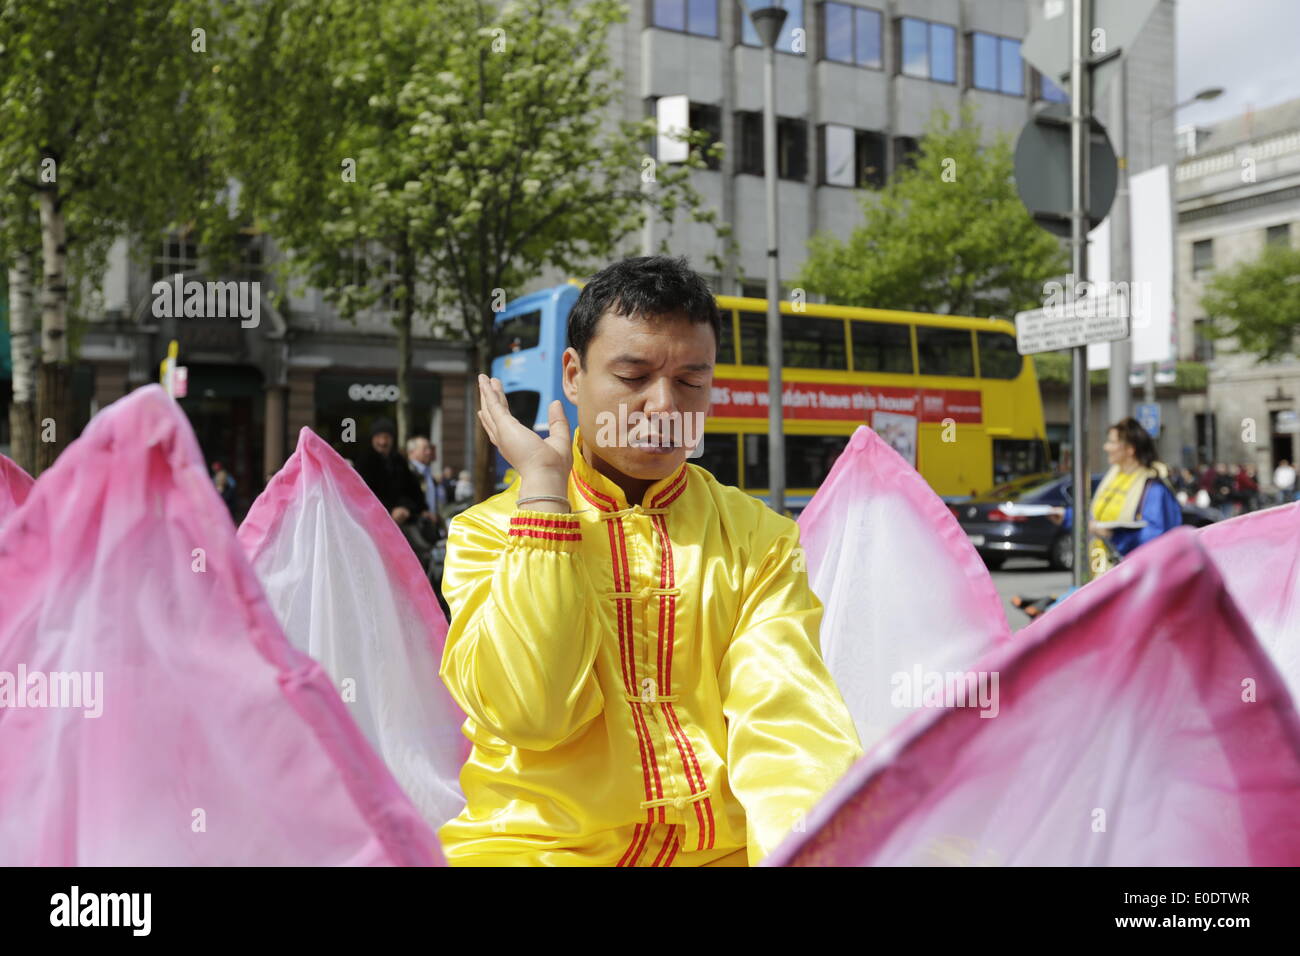 Dublin, Ireland. 10th May 2014. A Falun Dafa practitioner sits in an large artificial flower, practicing Falun Dafa meditations during the procession to celebrate World Falun Dafa Day in Dublin. Falun Dafa is calling for an end of the persecution of Falun Dafa by the Chinese government. Credit:  Michael Debets/Alamy Live News Stock Photo